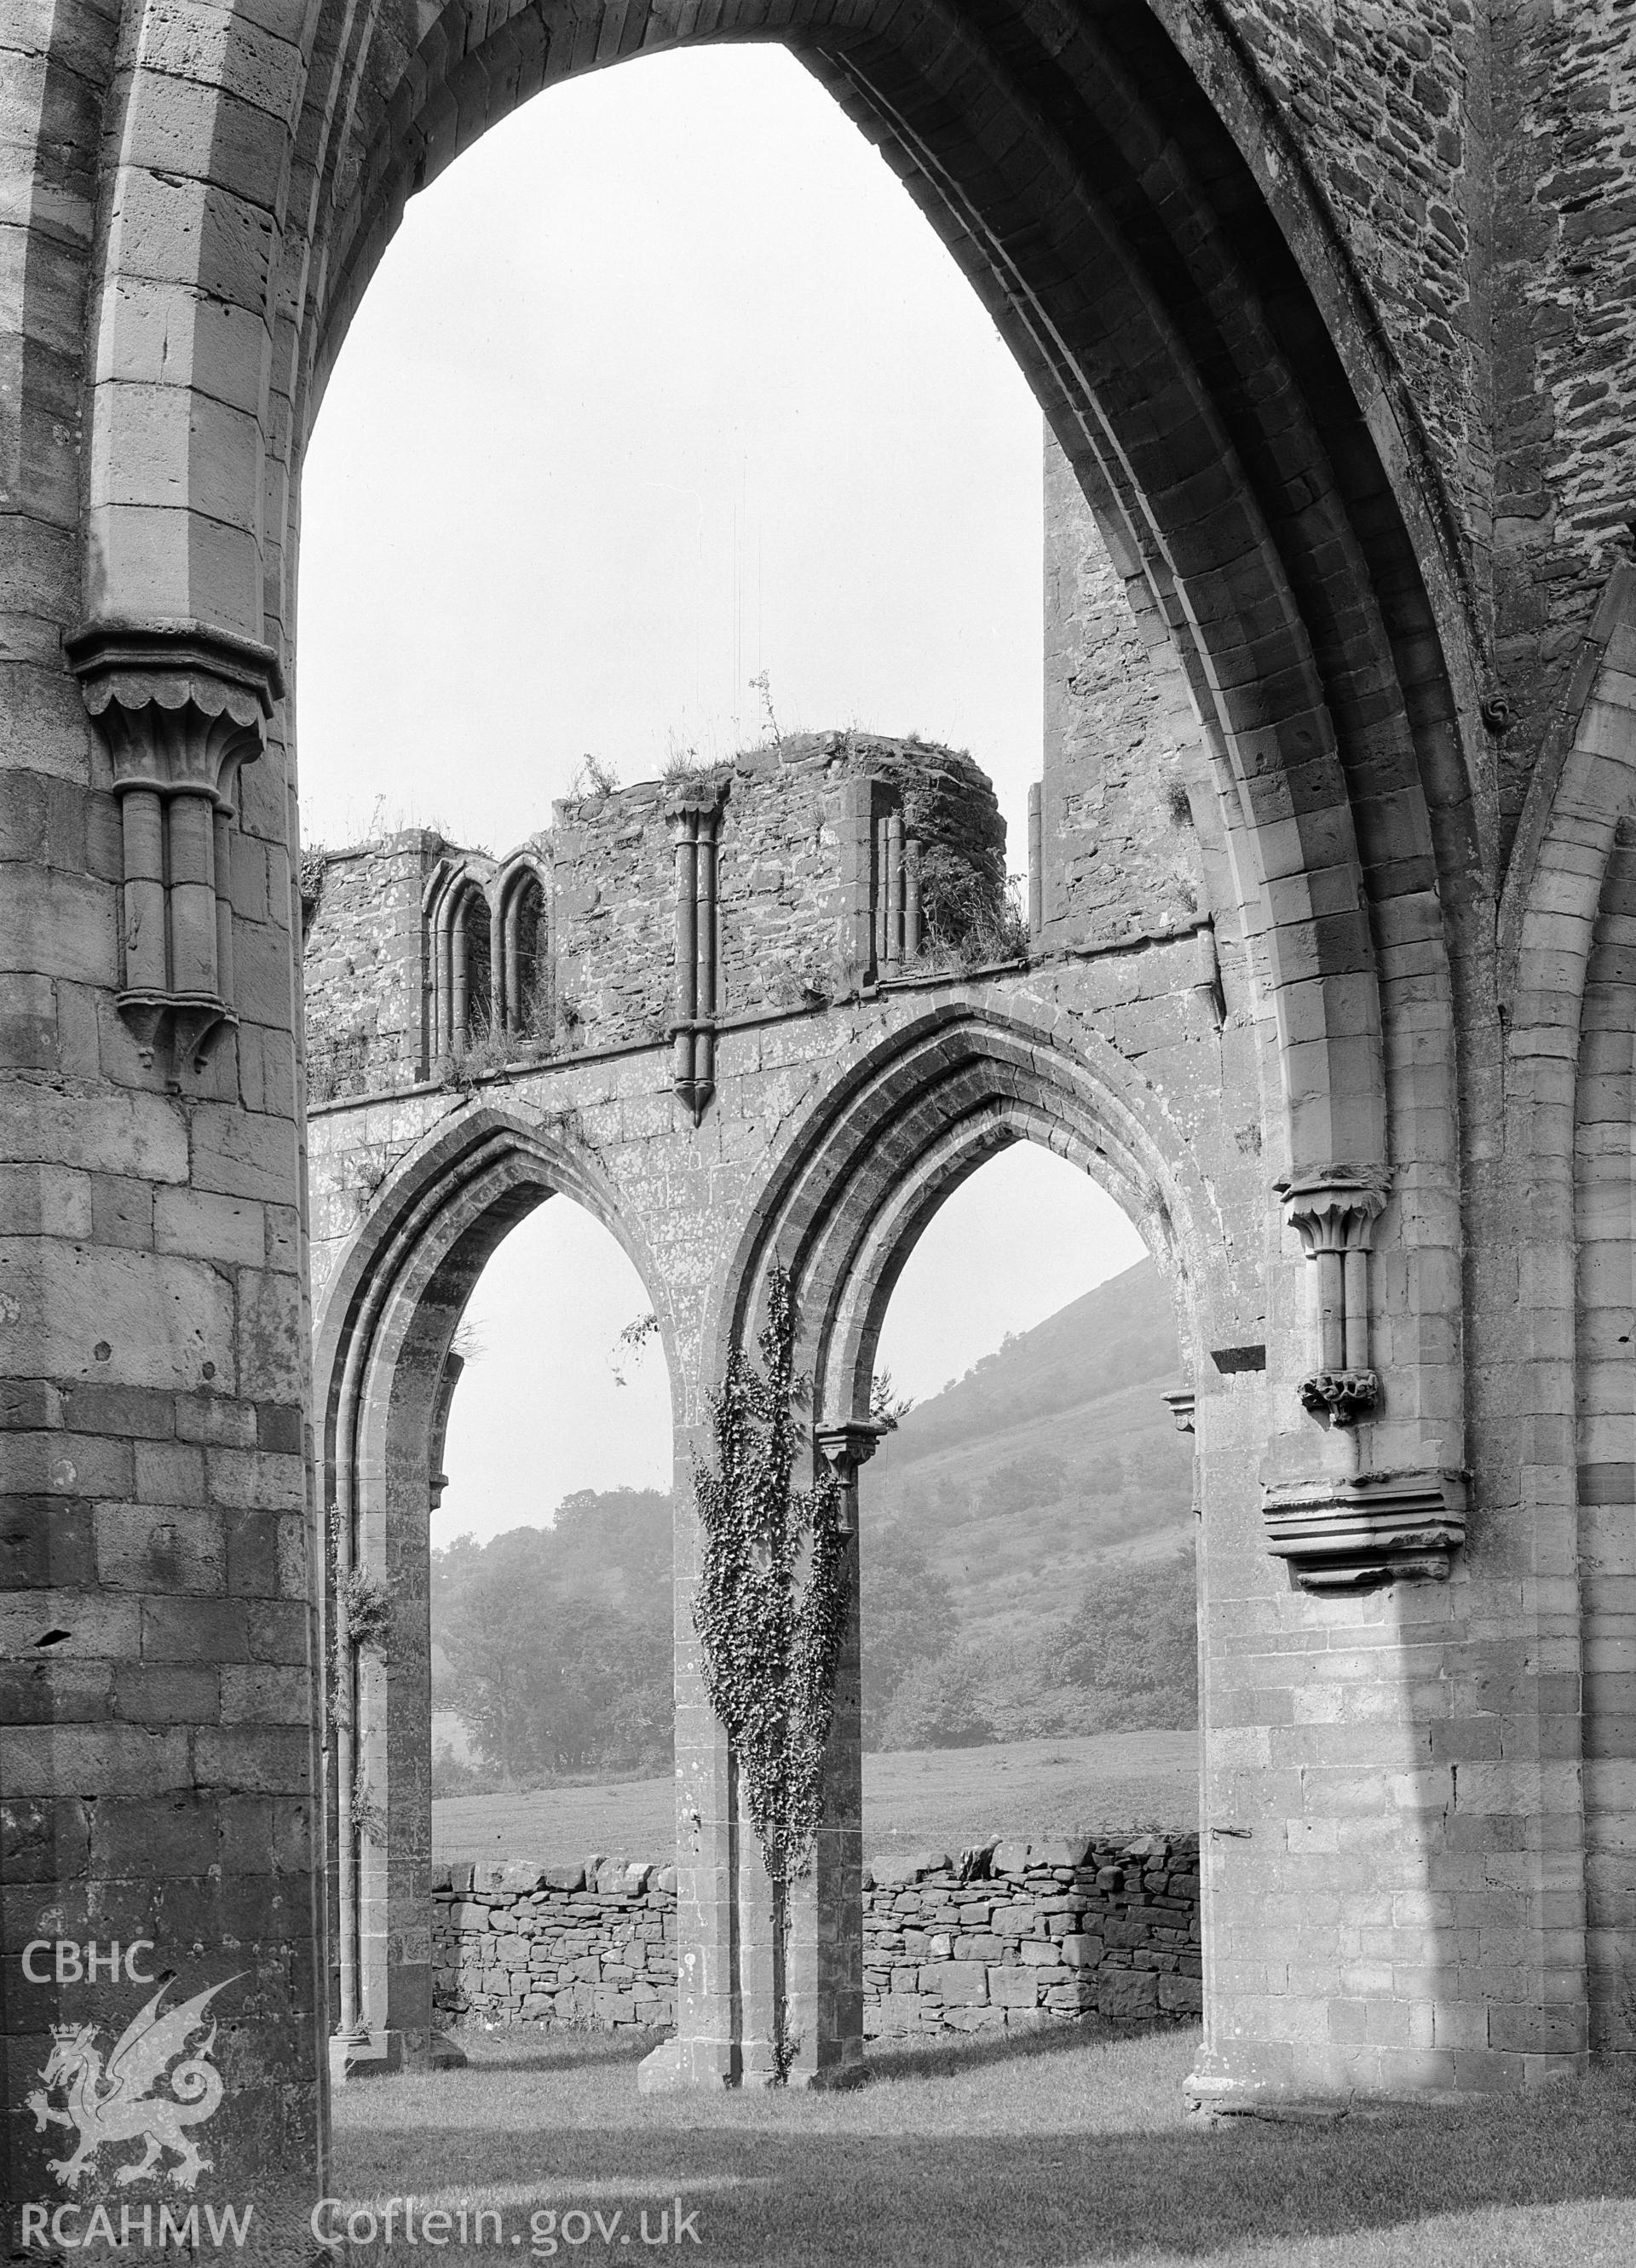 View of Llanthony Abbey from the south transept, taken by Clayton